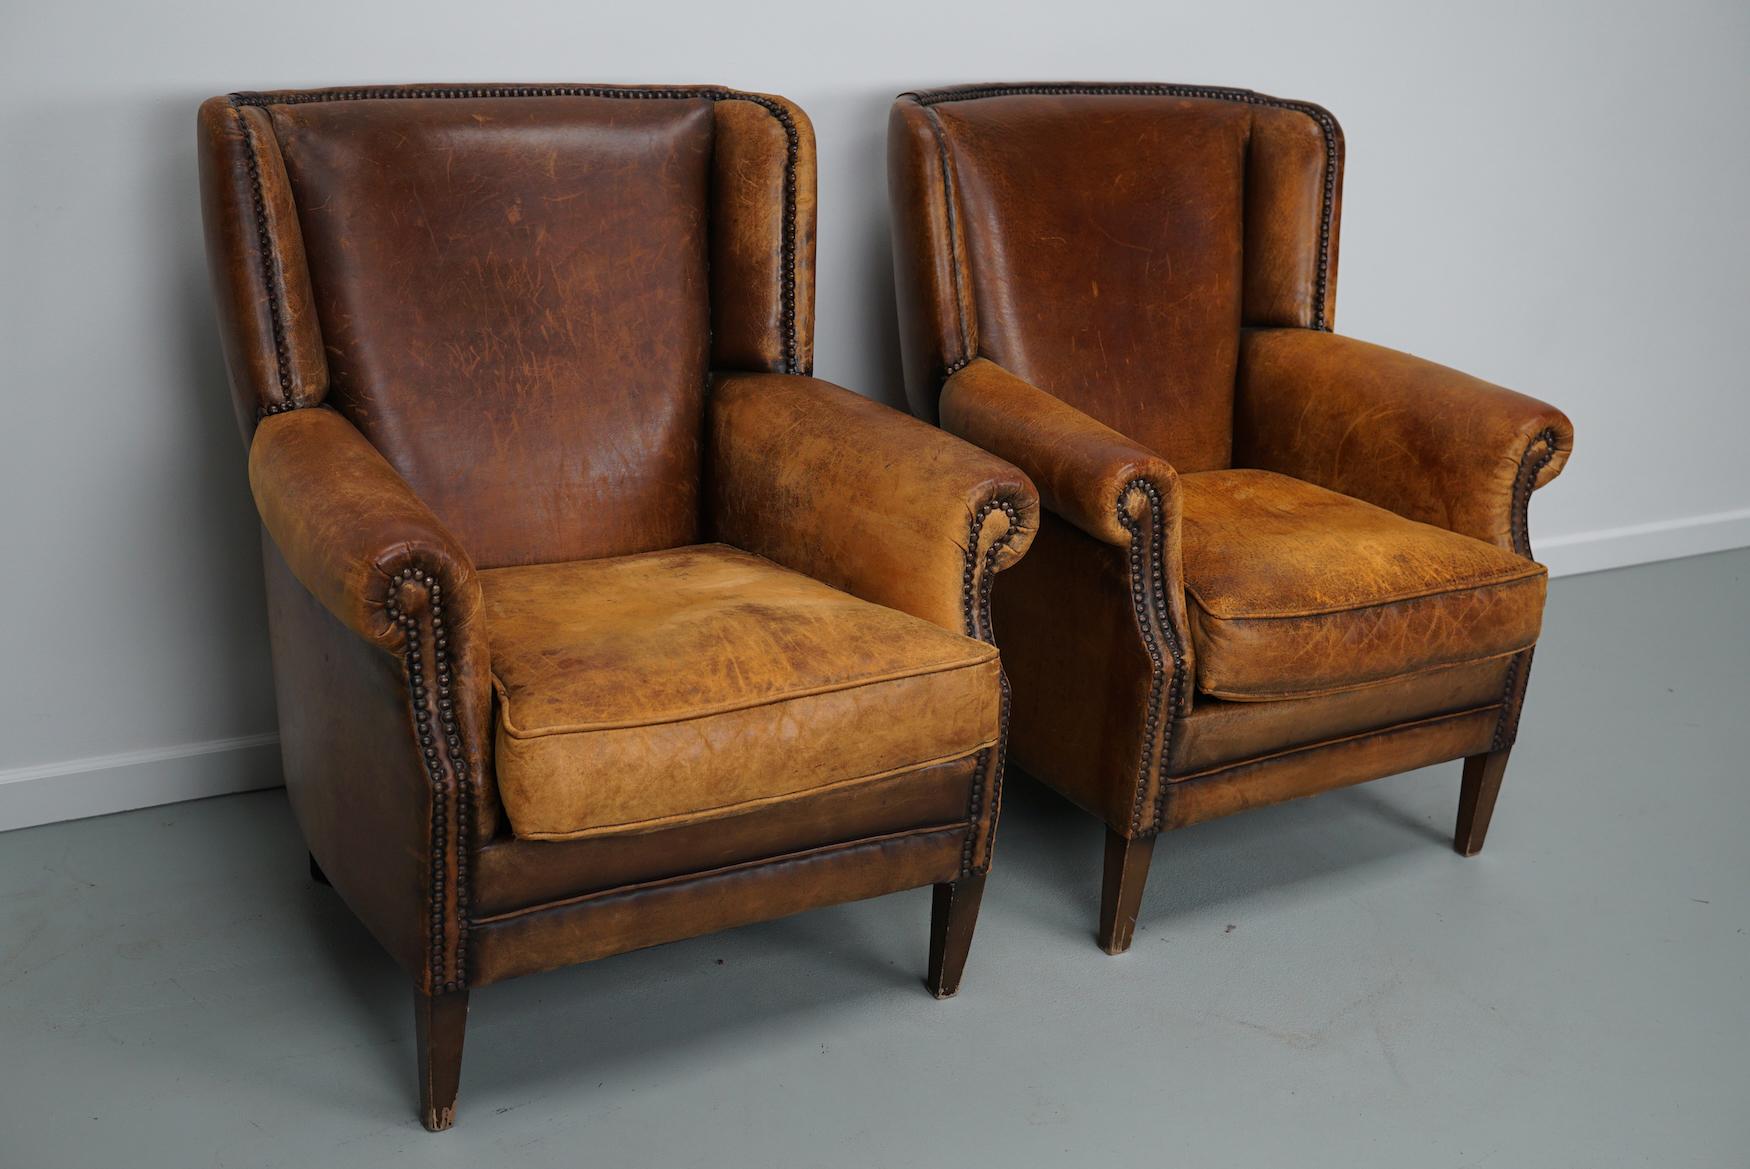 Industrial Vintage Dutch Cognac Colored Leather Club Chair, Set of 2 with Footstool